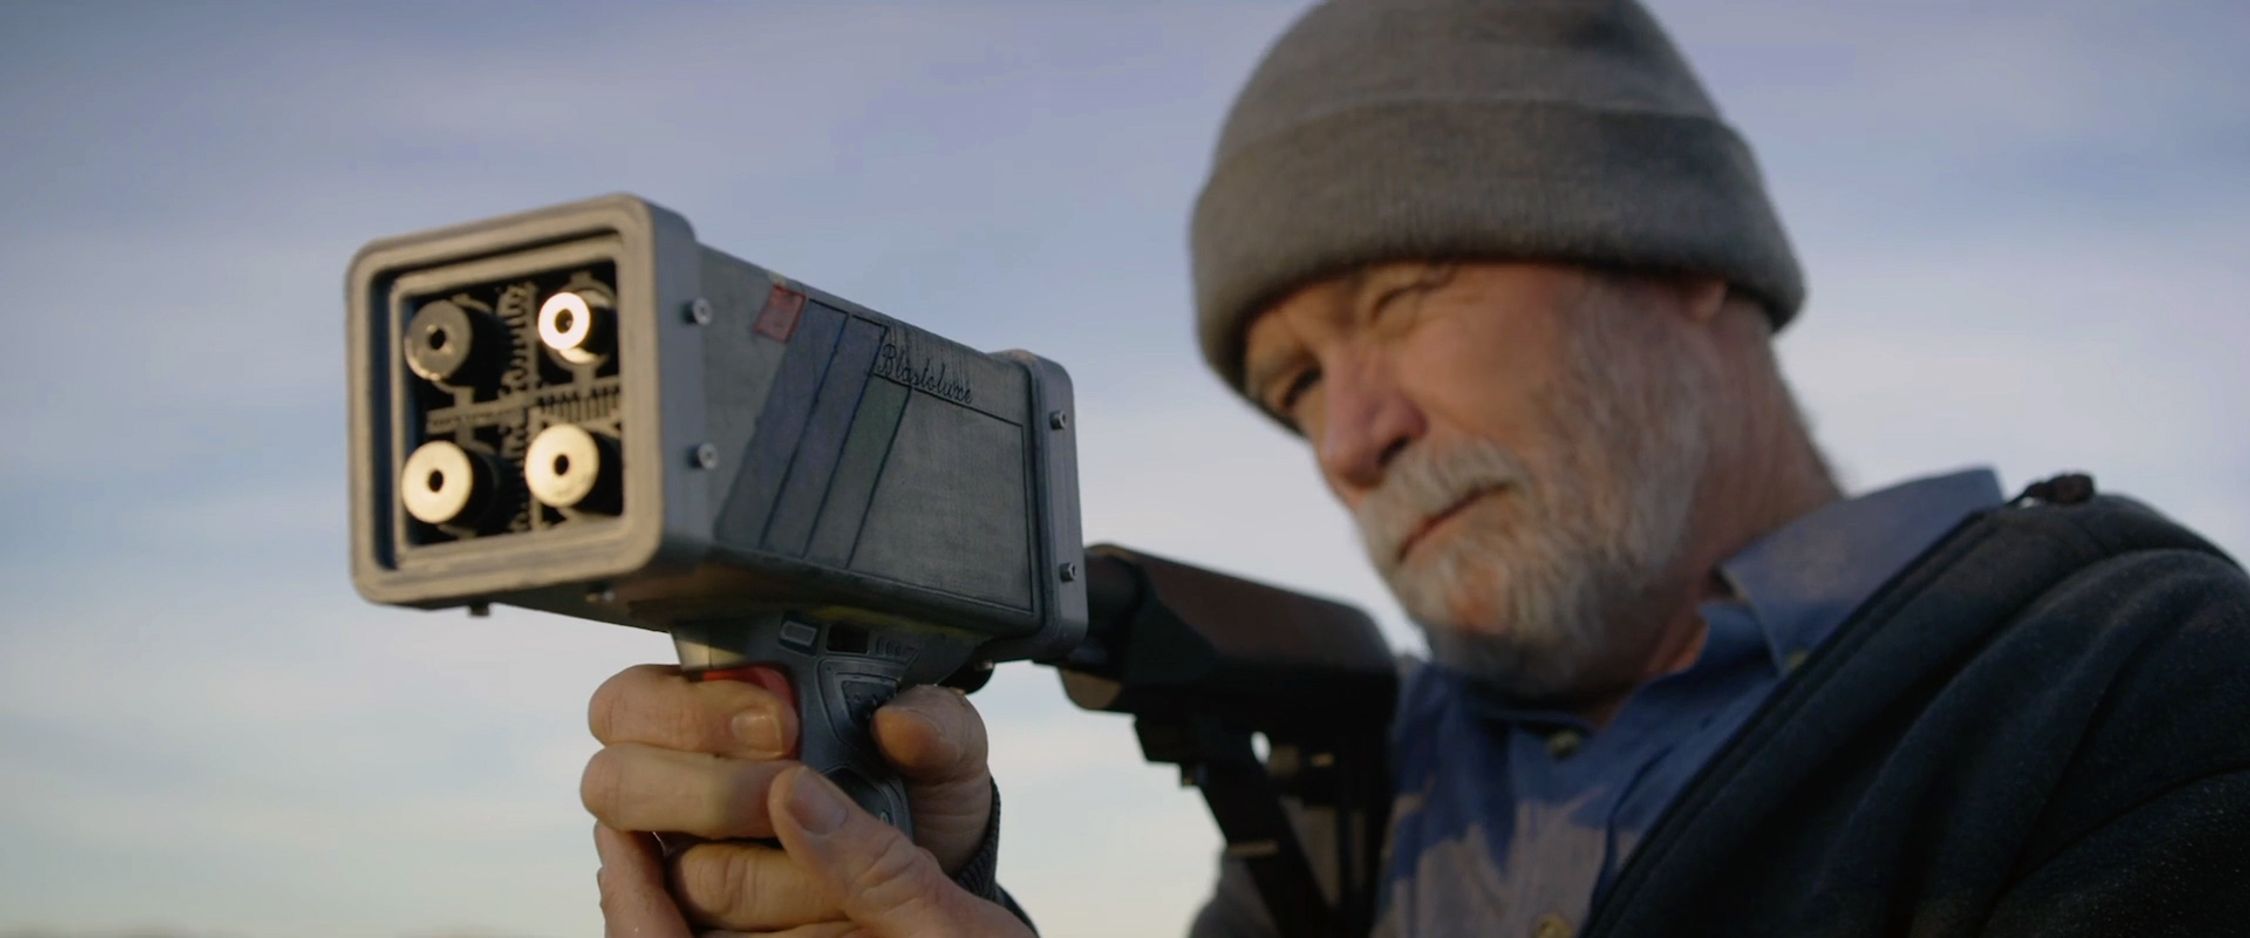 An individual, likely a mature adult given the visible gray beard and wrinkles, is aiming a laser gun. The device is held up to their face, and their focused gaze is directed towards the target. They are wearing a gray beanie and a dark jacket, and the background is softly blurred with a clear sky, indicating an outdoor setting during the day. The device’s detailed mechanics are visible, emphasizing a the advanced technology.